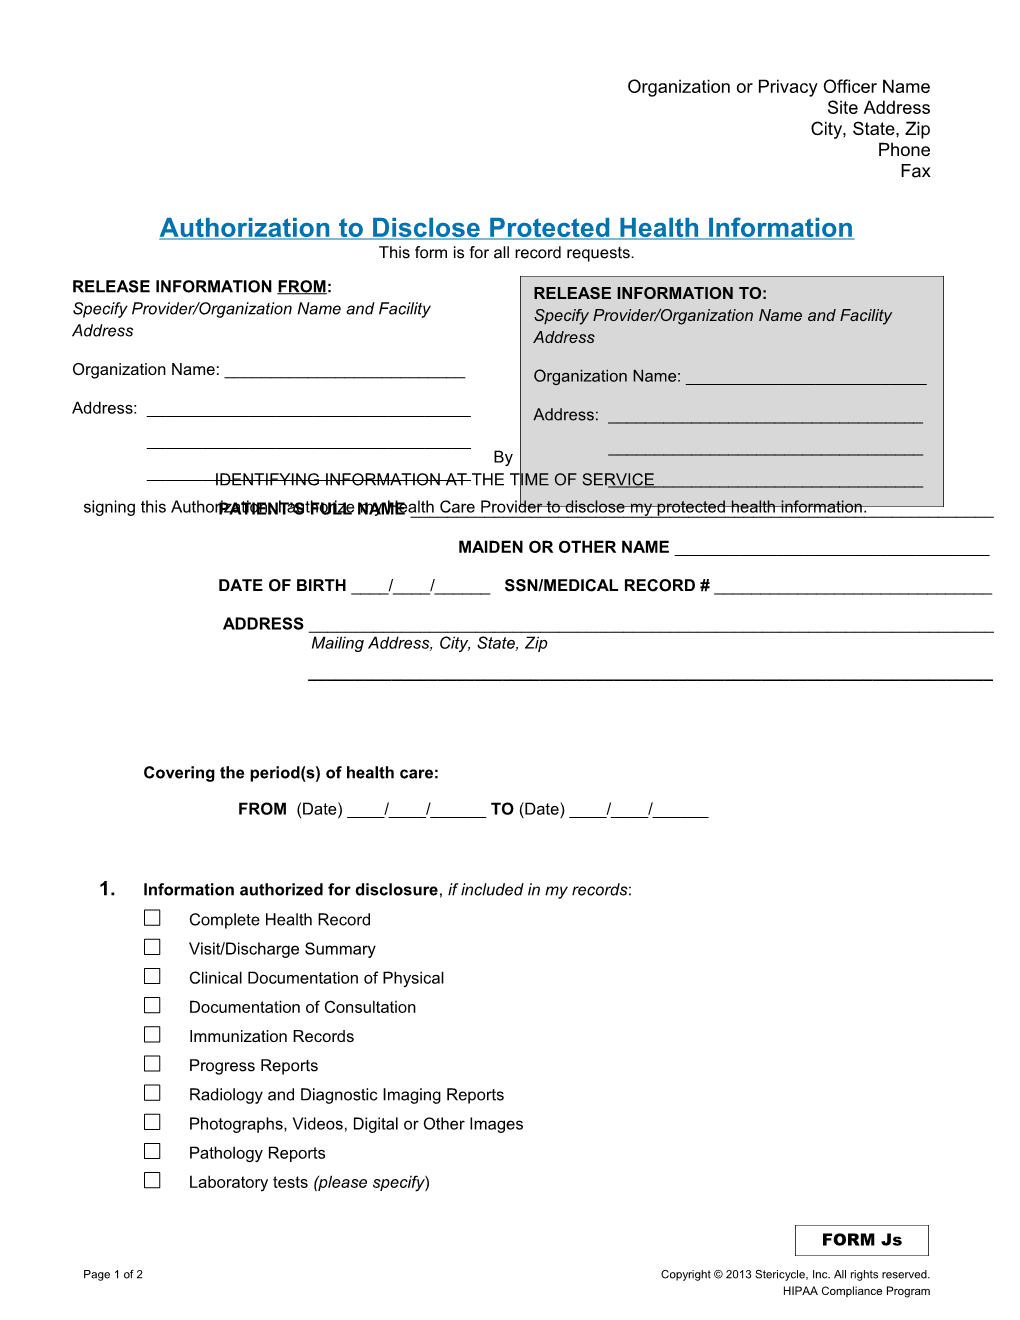 Authorization to Disclose Protected Health Information